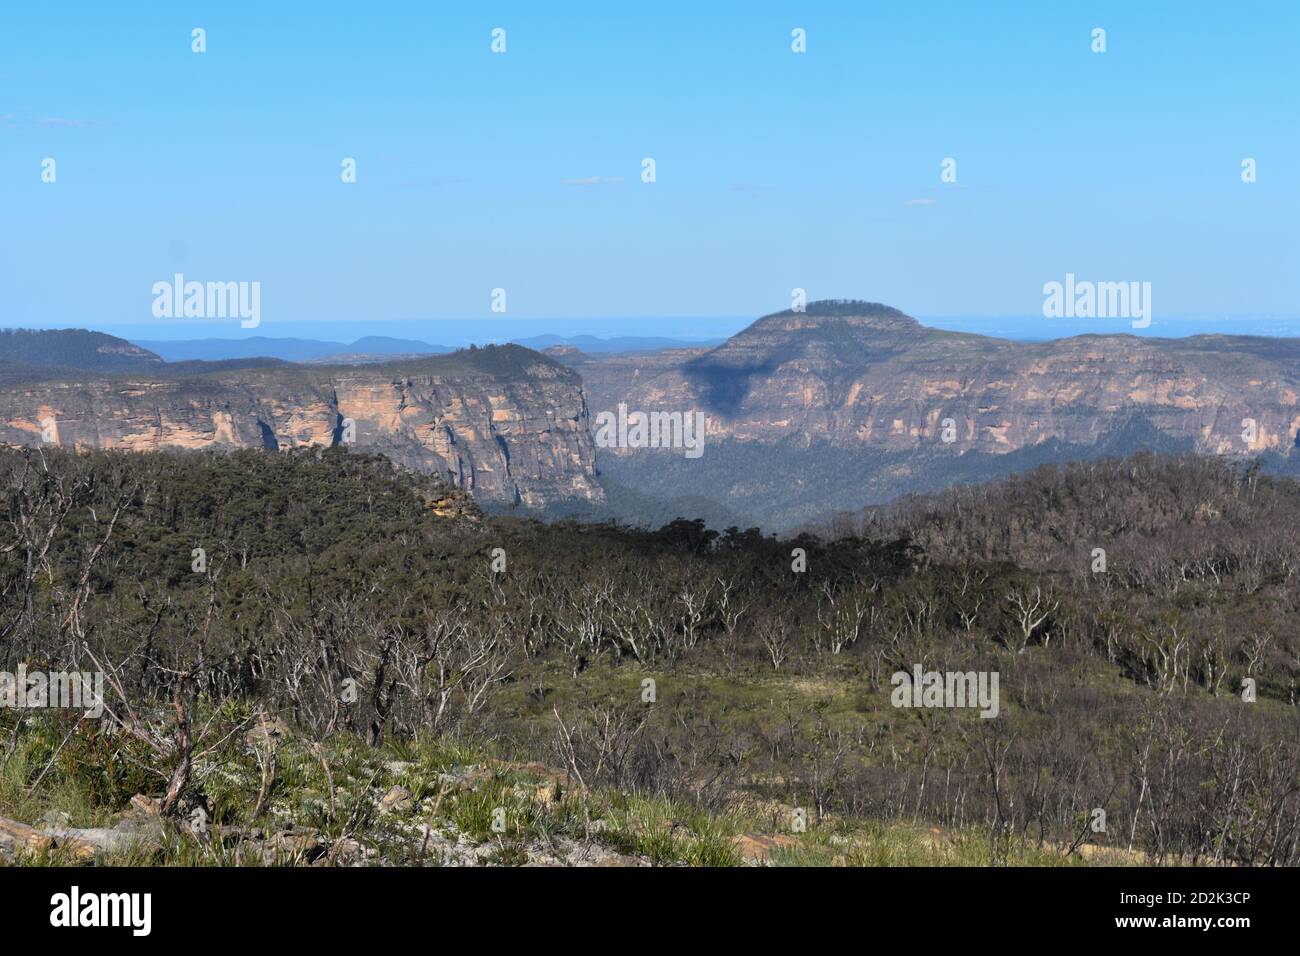 view of mountains and cliffs with flora and trees growing on it Stock Photo